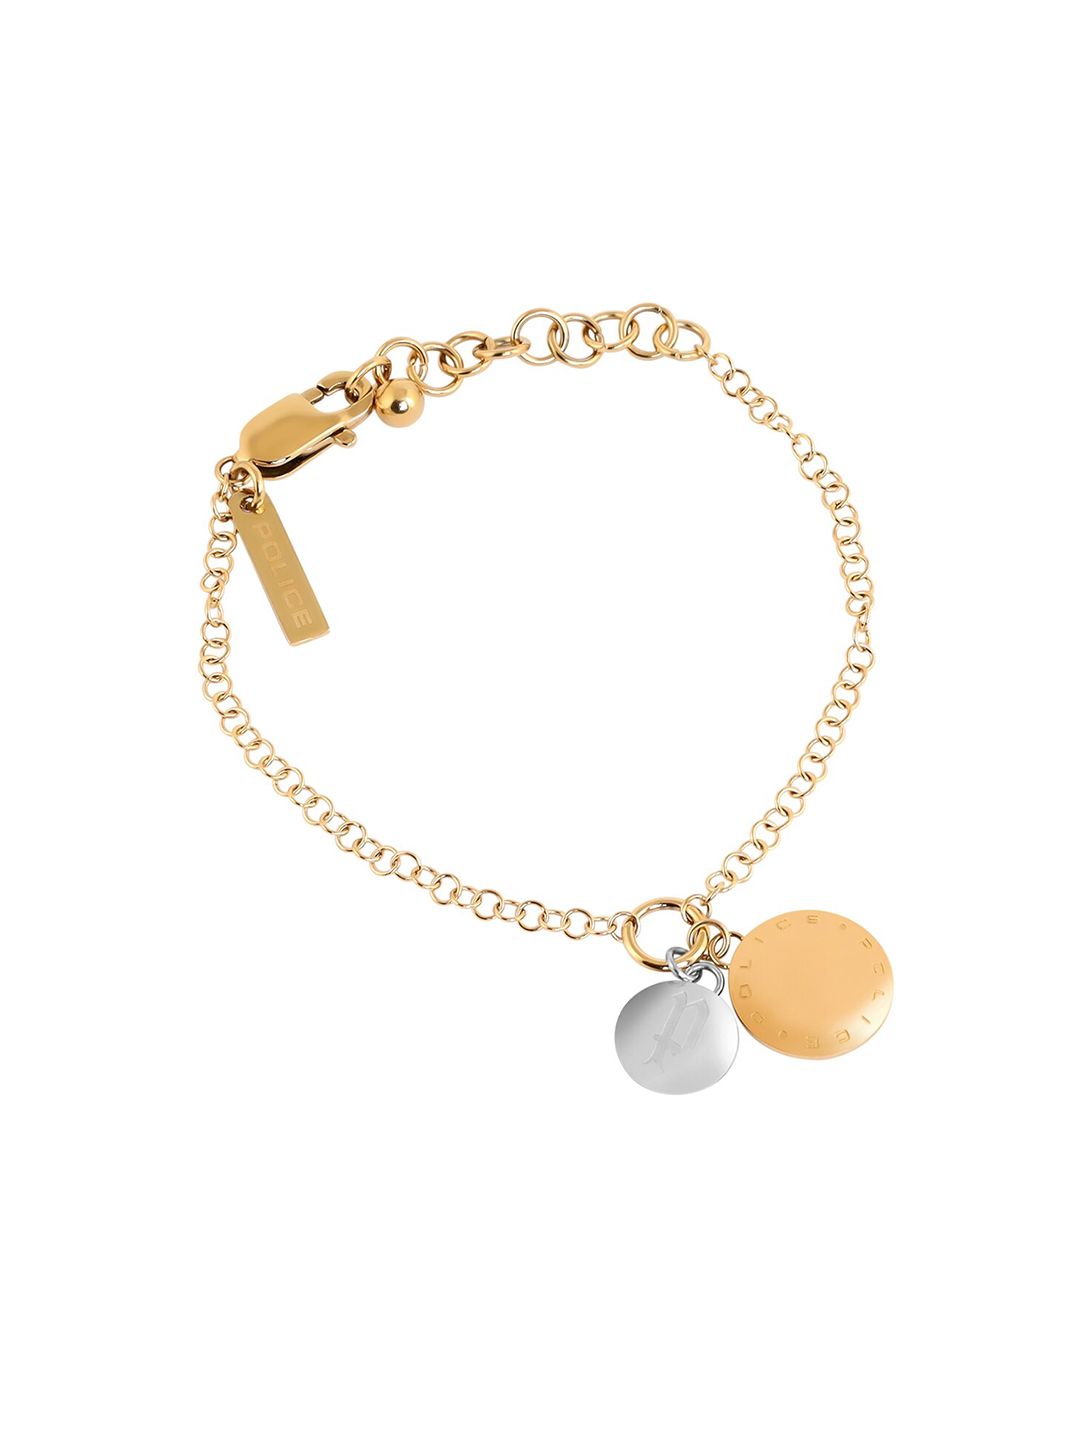 Police Women Gold-Toned & Silver-Toned Charm Bracelet Price in India